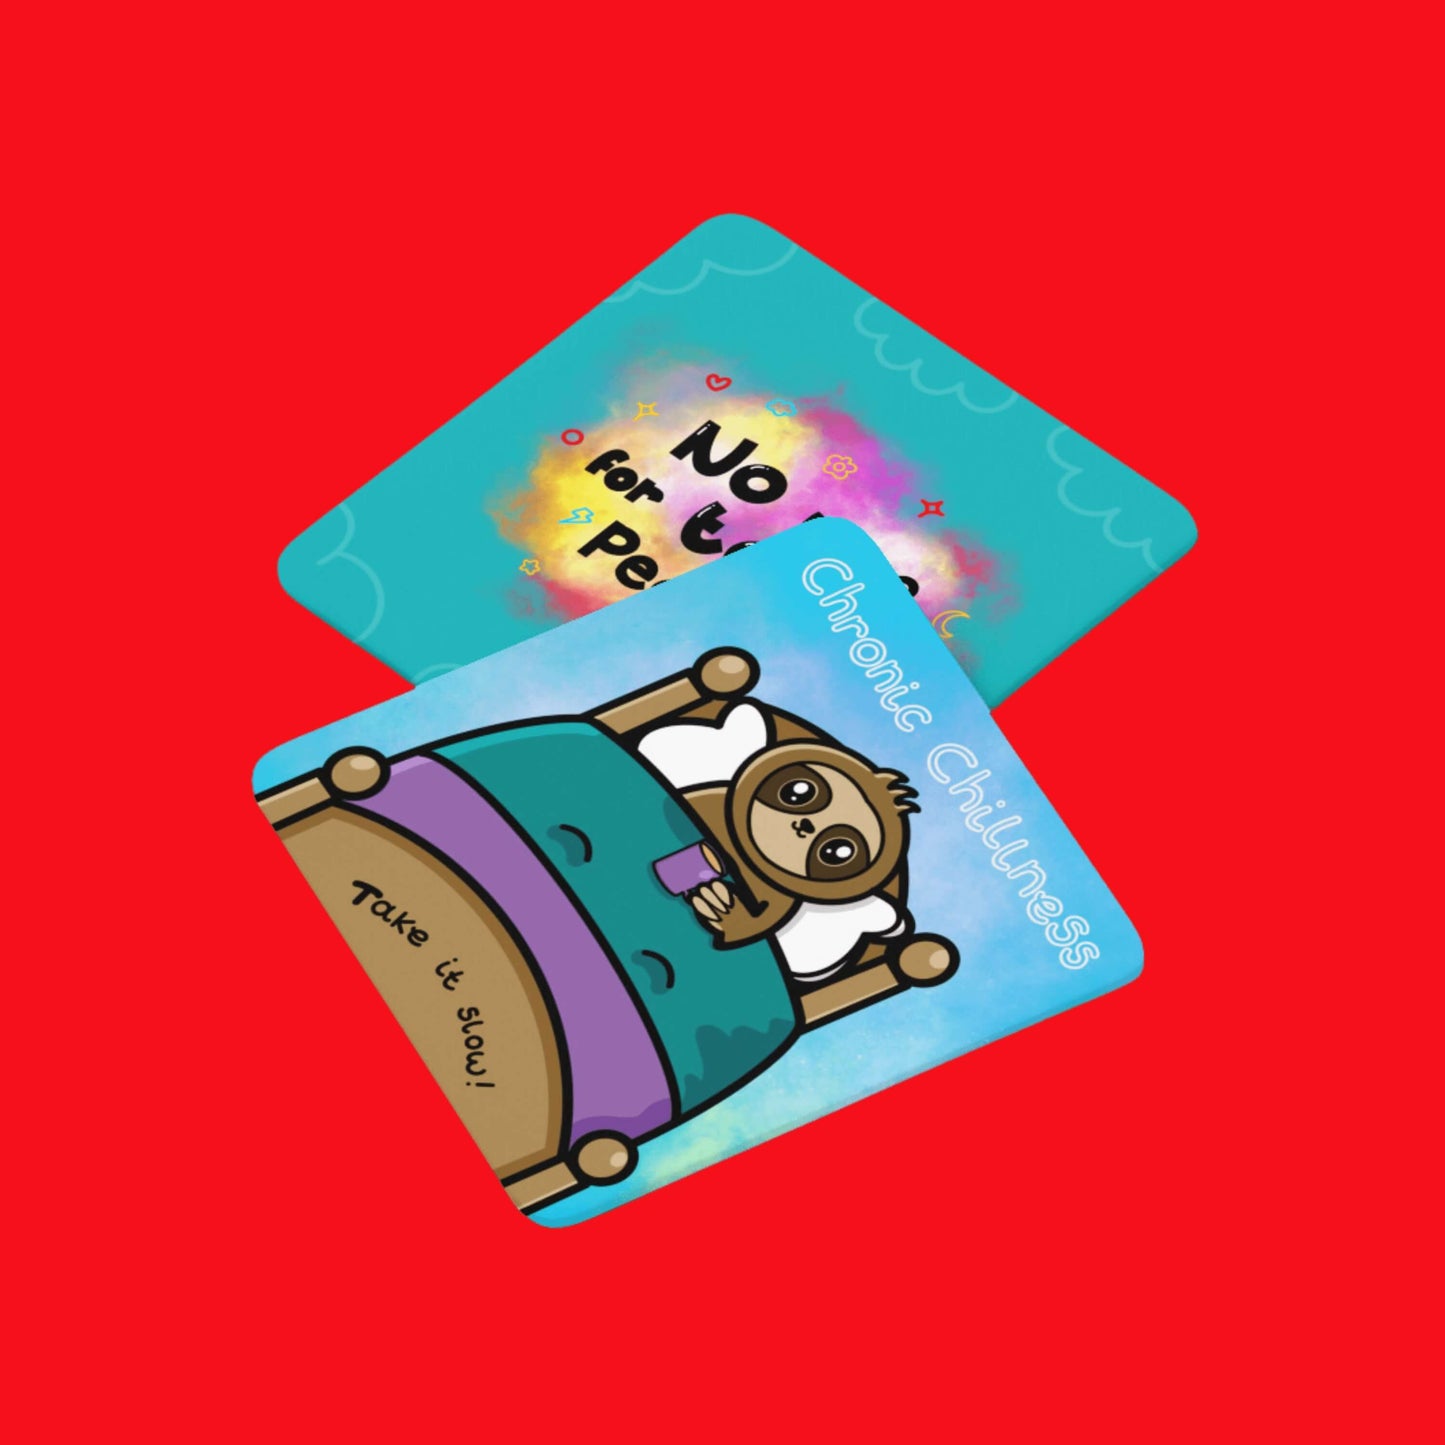 The Chronic Chillness Coaster - Chronic Illness on a red background with the no time for toxic people coaster from innabox. The blue base coaster features a sloth smiling in a wooden bed with blue and purple bedsheets clutching a purple mug of tea. Above in white reads 'chronic chillness' and along the bottom of the bed reads 'take it slow'. The design was created to raise awareness for chronic illness and invisible illness.